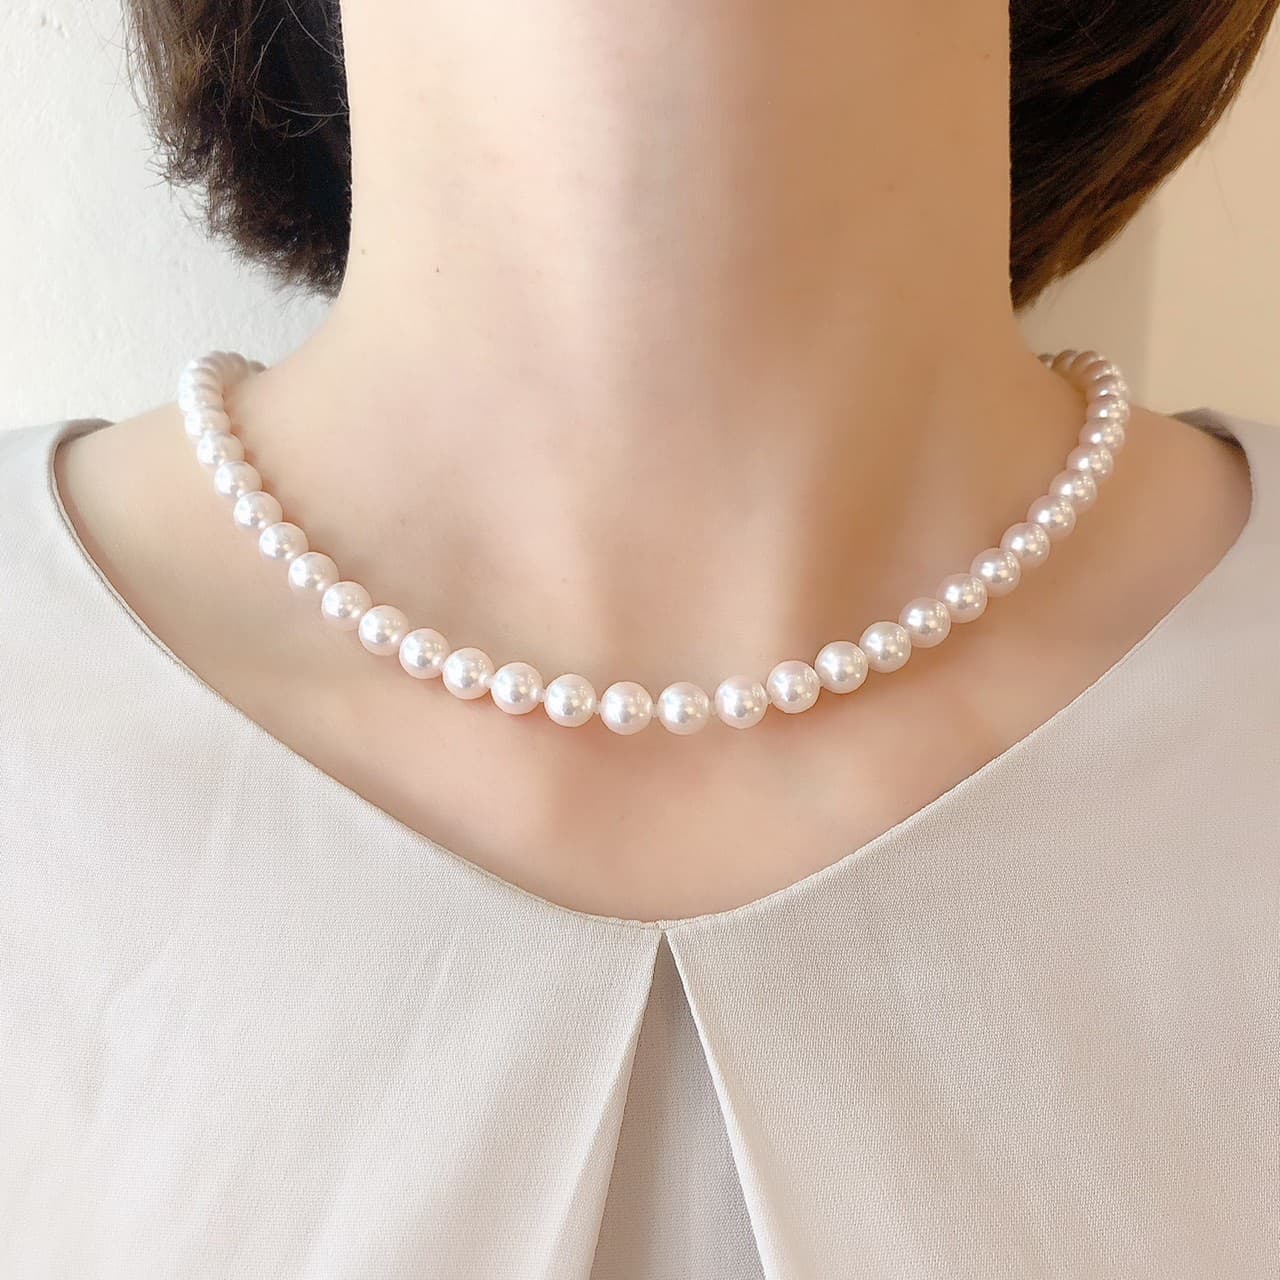 Akoya pearl necklace & pearl earrings set【S】/アコヤ真珠ネックレス＆イヤリングセット Sサイズ-3